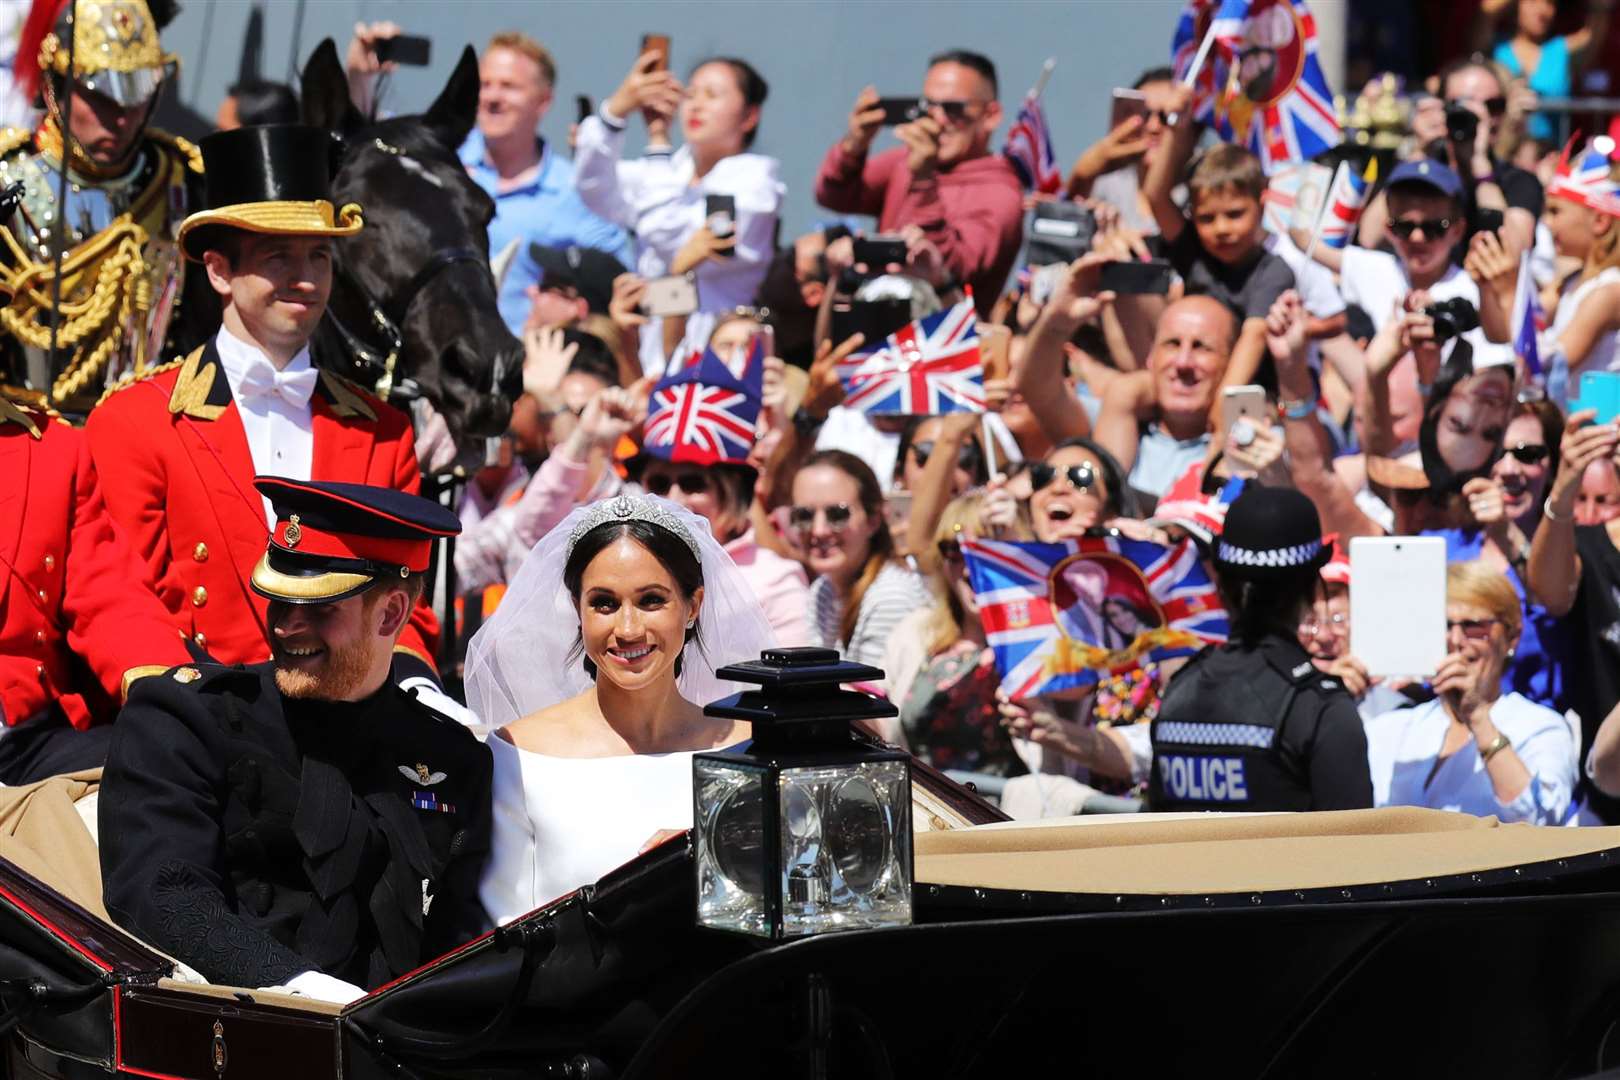 The Sussexes ride through Windsor in an Ascot Landau carriage after their wedding (Christopher Furlong/PA)